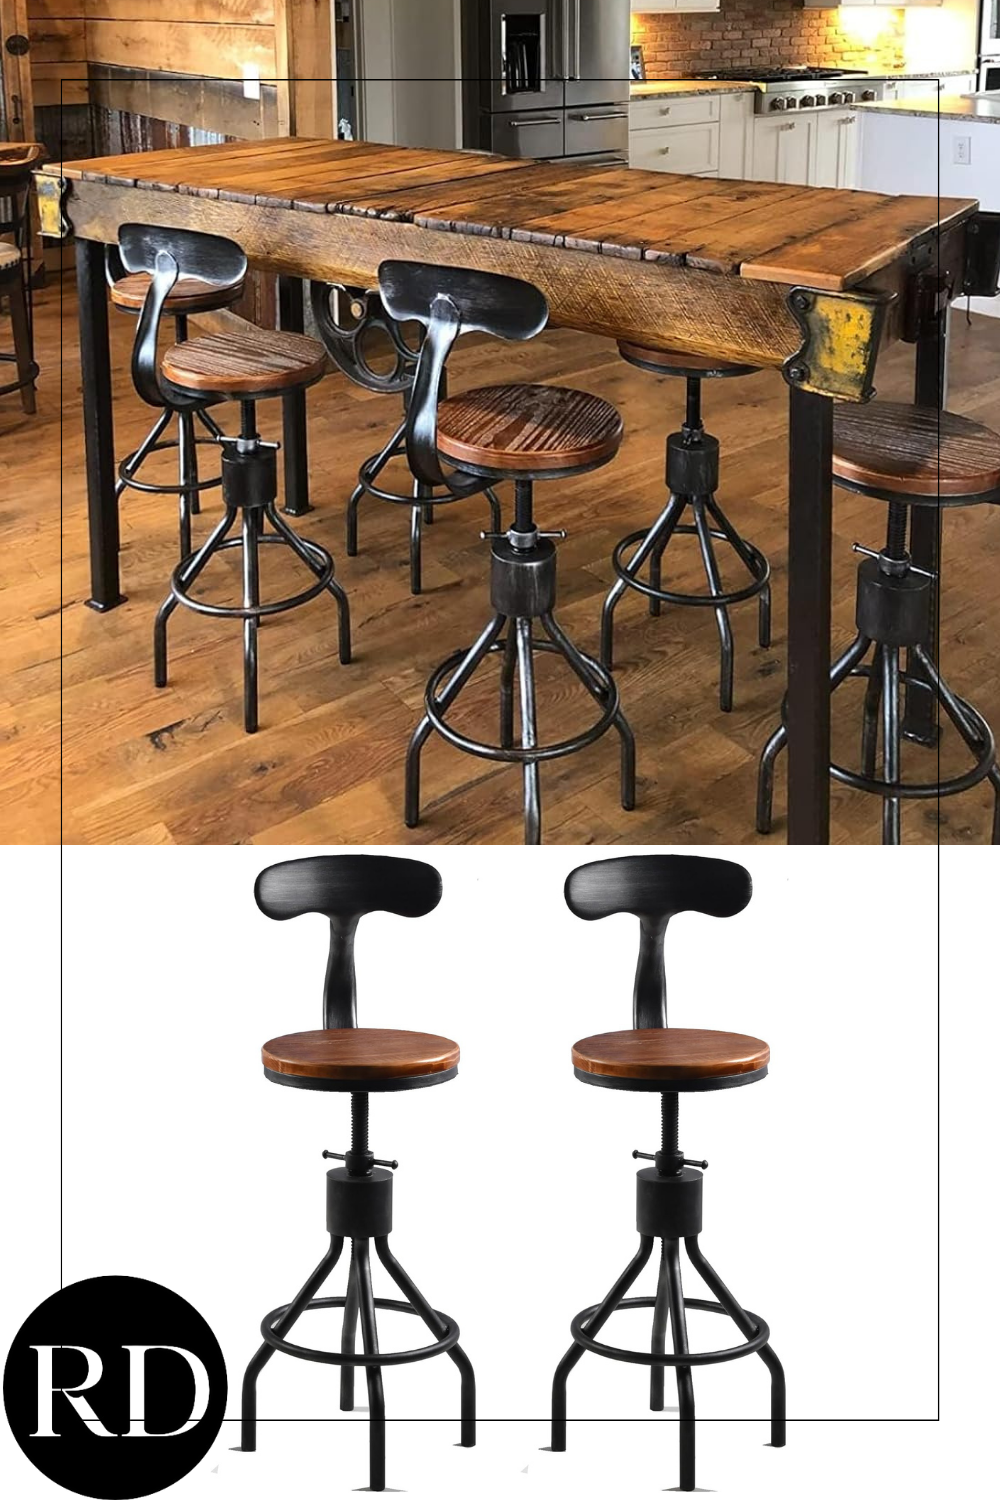 Set of 2 Industrial Bar Stool-Adjustable Swivel Wood Metal Bar Stool-Counter Height to Extra Tall Farmhouse Bar Stool-24-30 Inch Seat Height-with Backrest